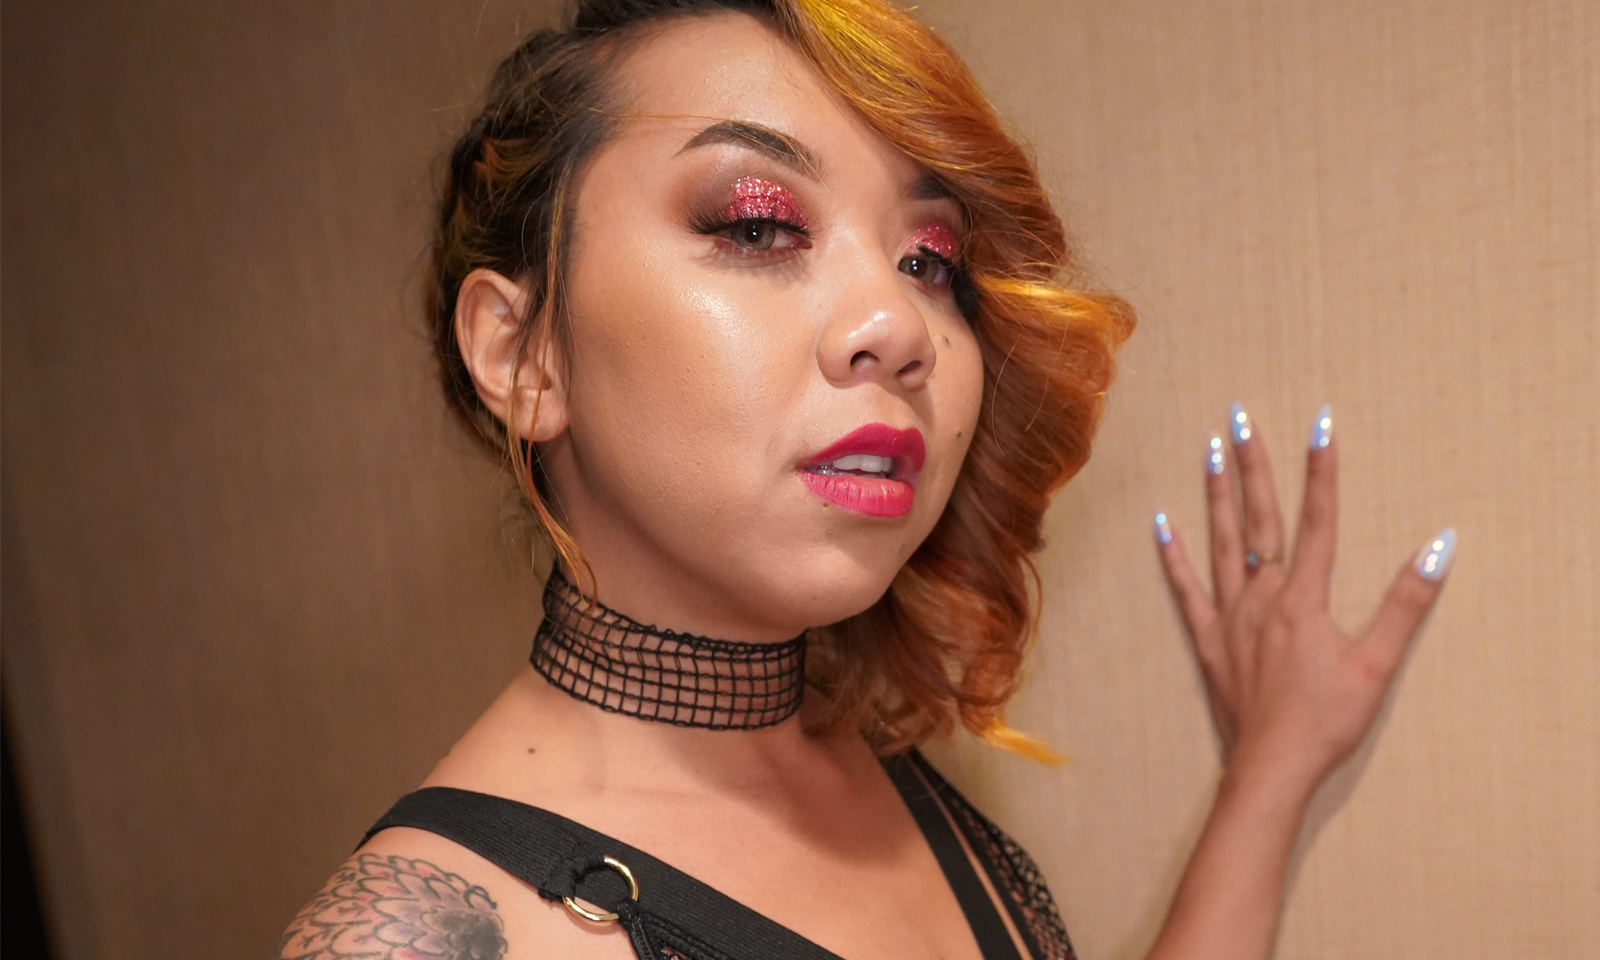 Kimberly Chi Set to Appear at Exxxotica Portland in June